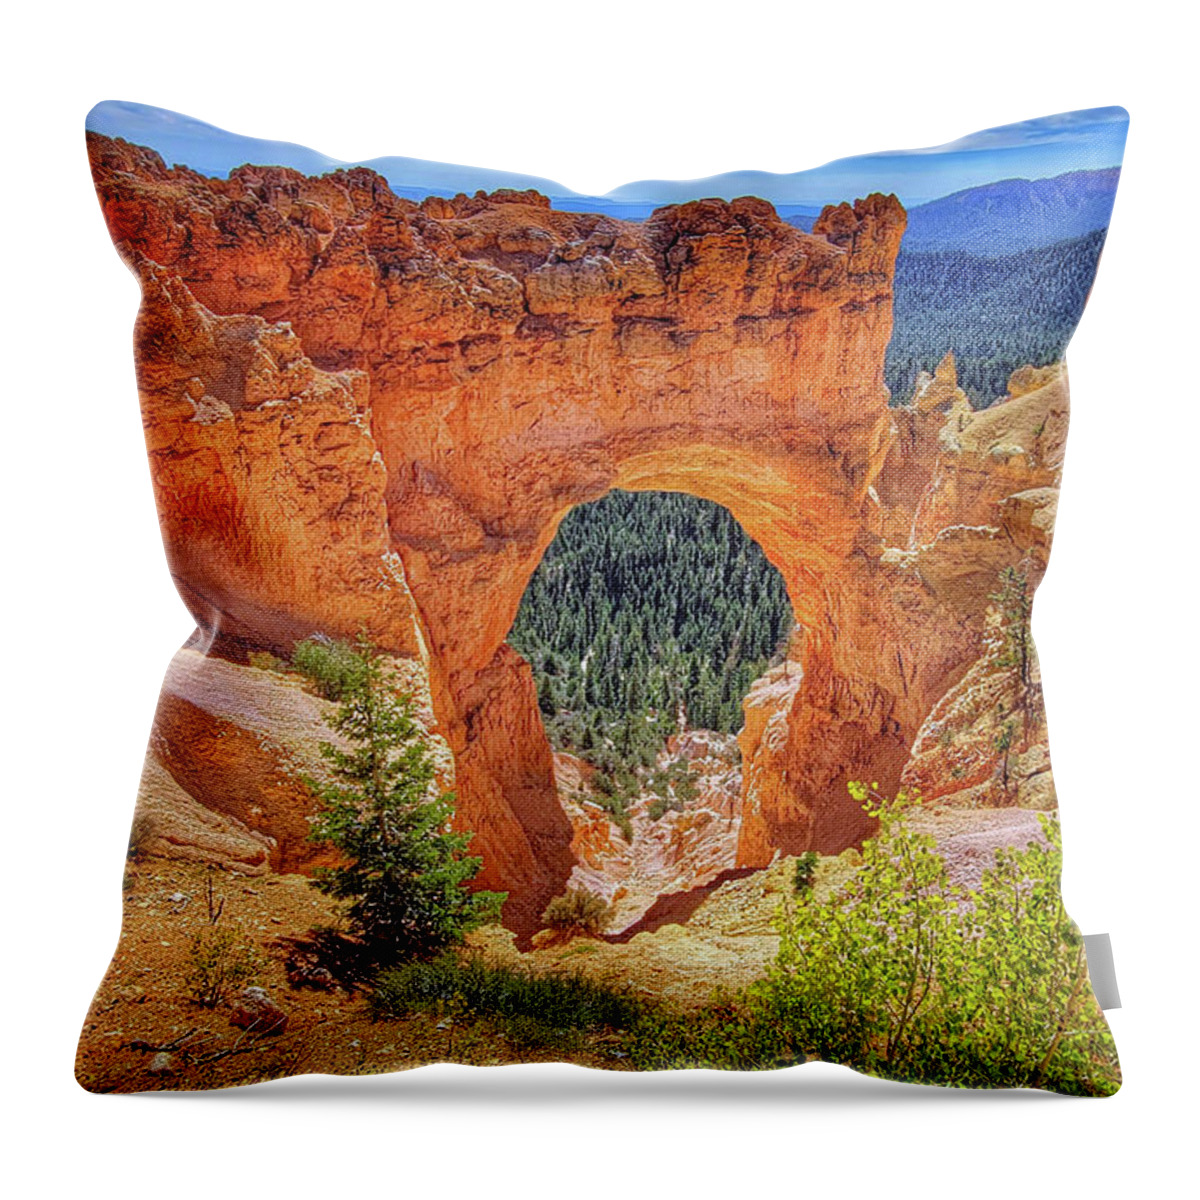 Bryce Canyon National Park Throw Pillow featuring the photograph Natural Bridge Bryce Canyon by Suzanne Stout